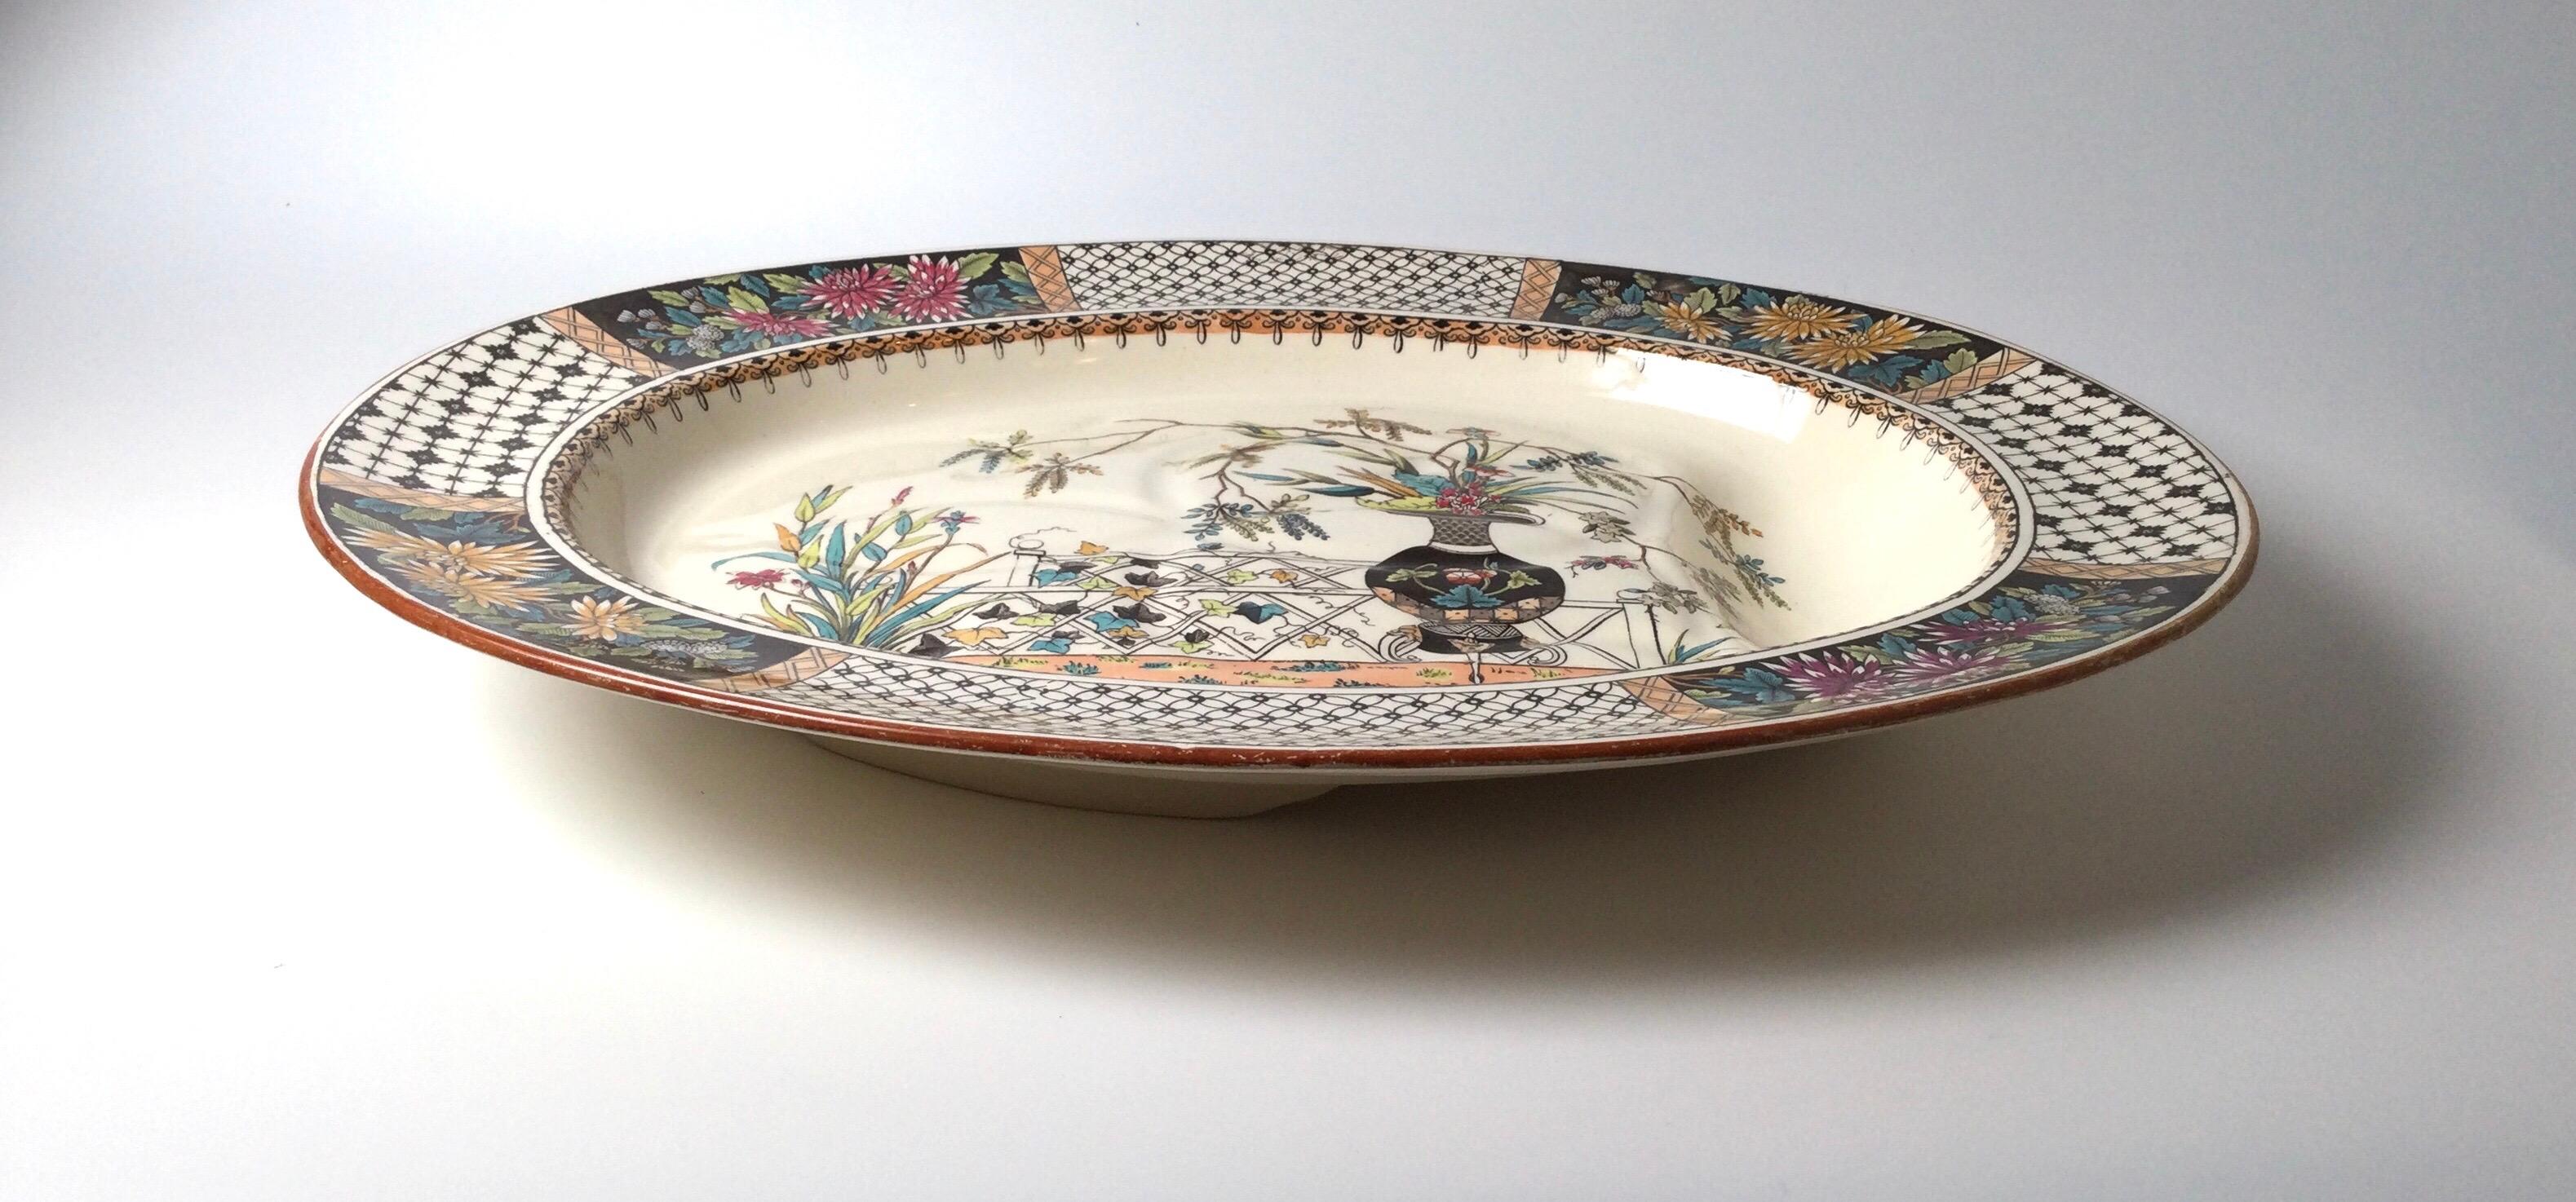 Oversized Aesthetic Period Copland Ironstone Chrysanthemum Pattern Meat Platter For Sale 5